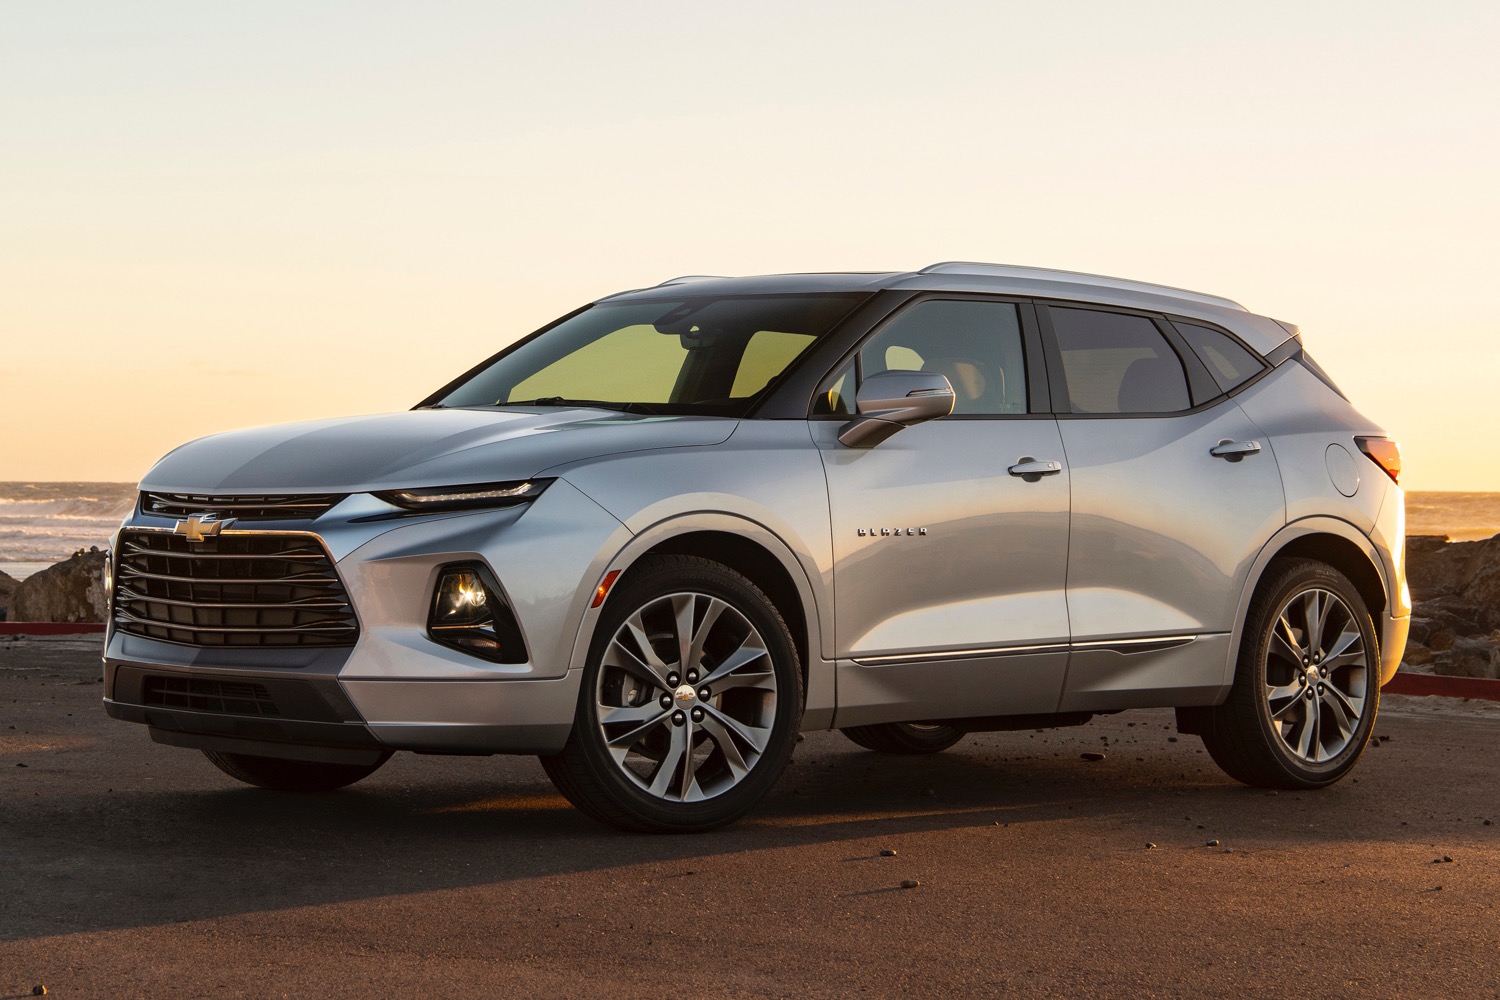 2021 Chevy Blazer: Here's What's New And Different | GM Authority